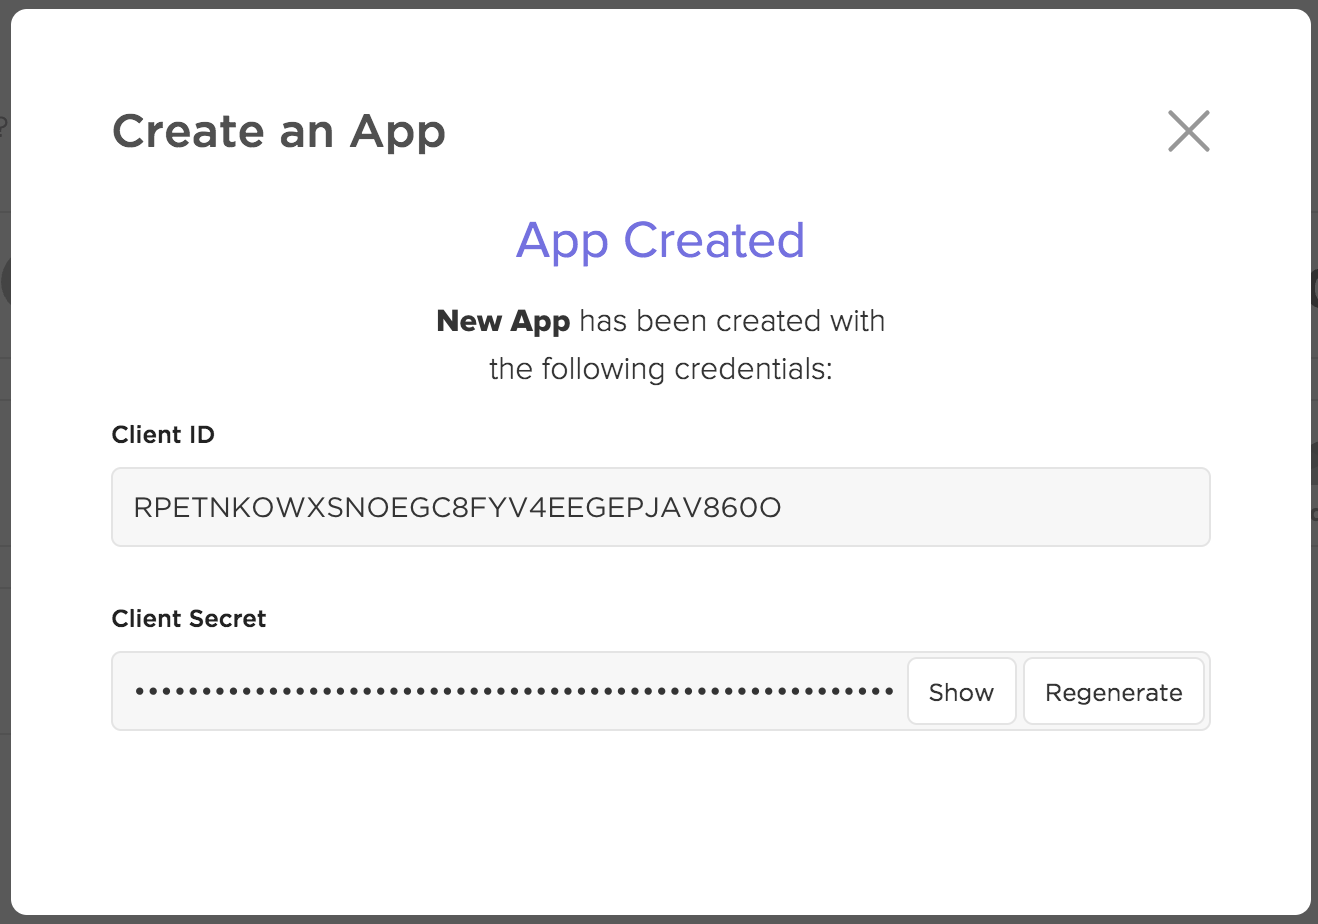 Screenshot showing the 'Create an App' modal with an example Client ID and Client Secret.